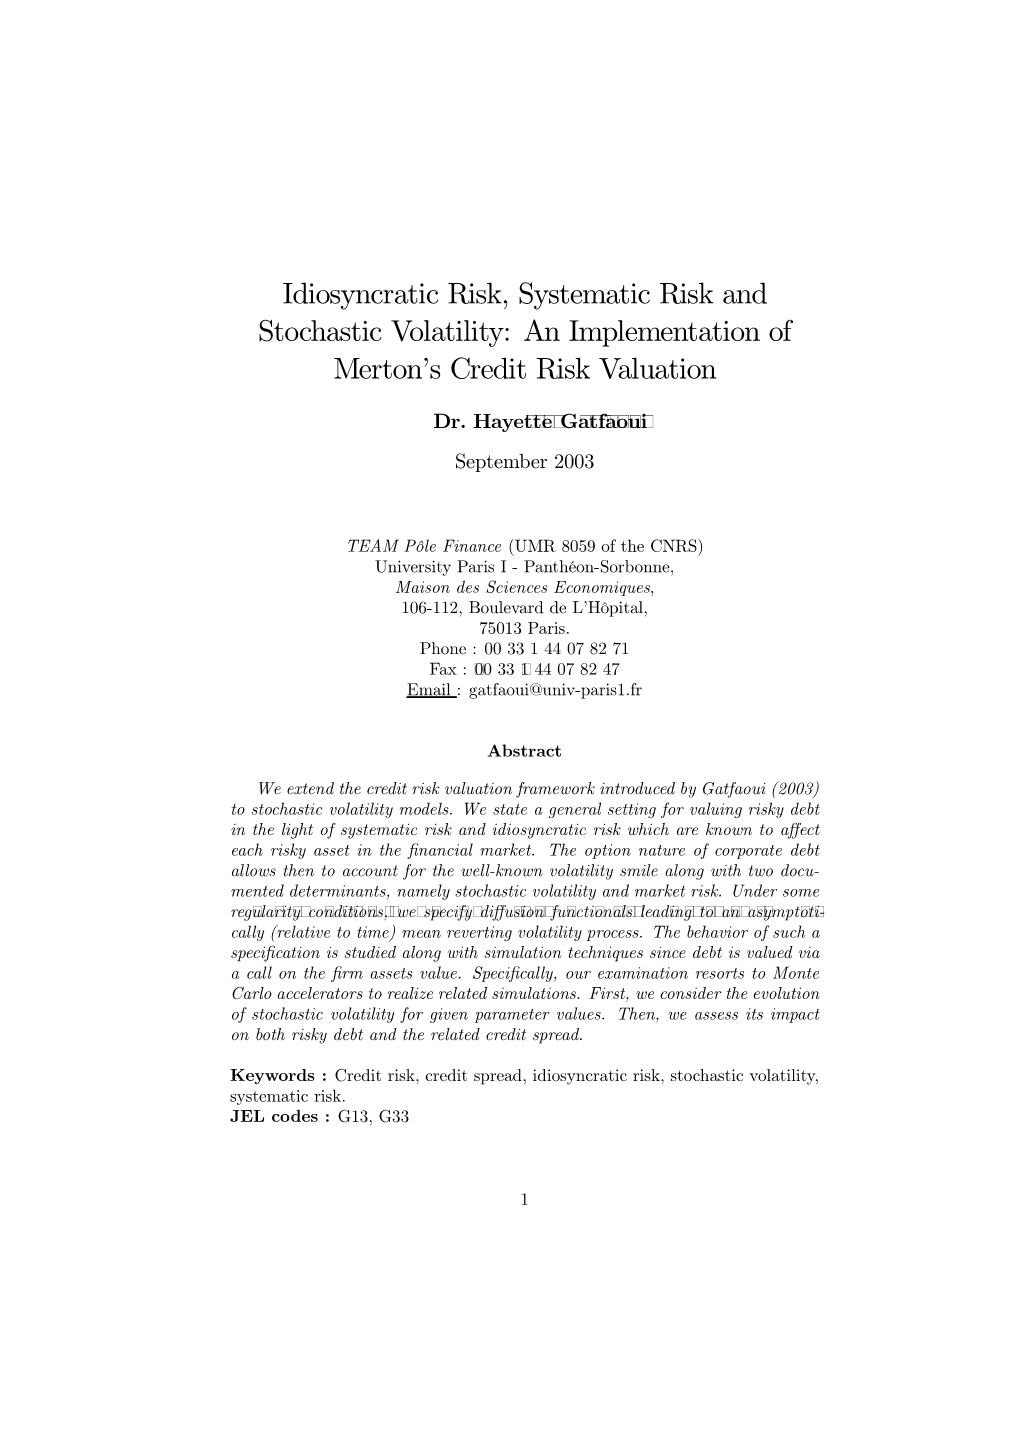 Idiosyncratic Risk, Systematic Risk and Stochastic Volatility: an Implementation of Merton’S Credit Risk Valuation